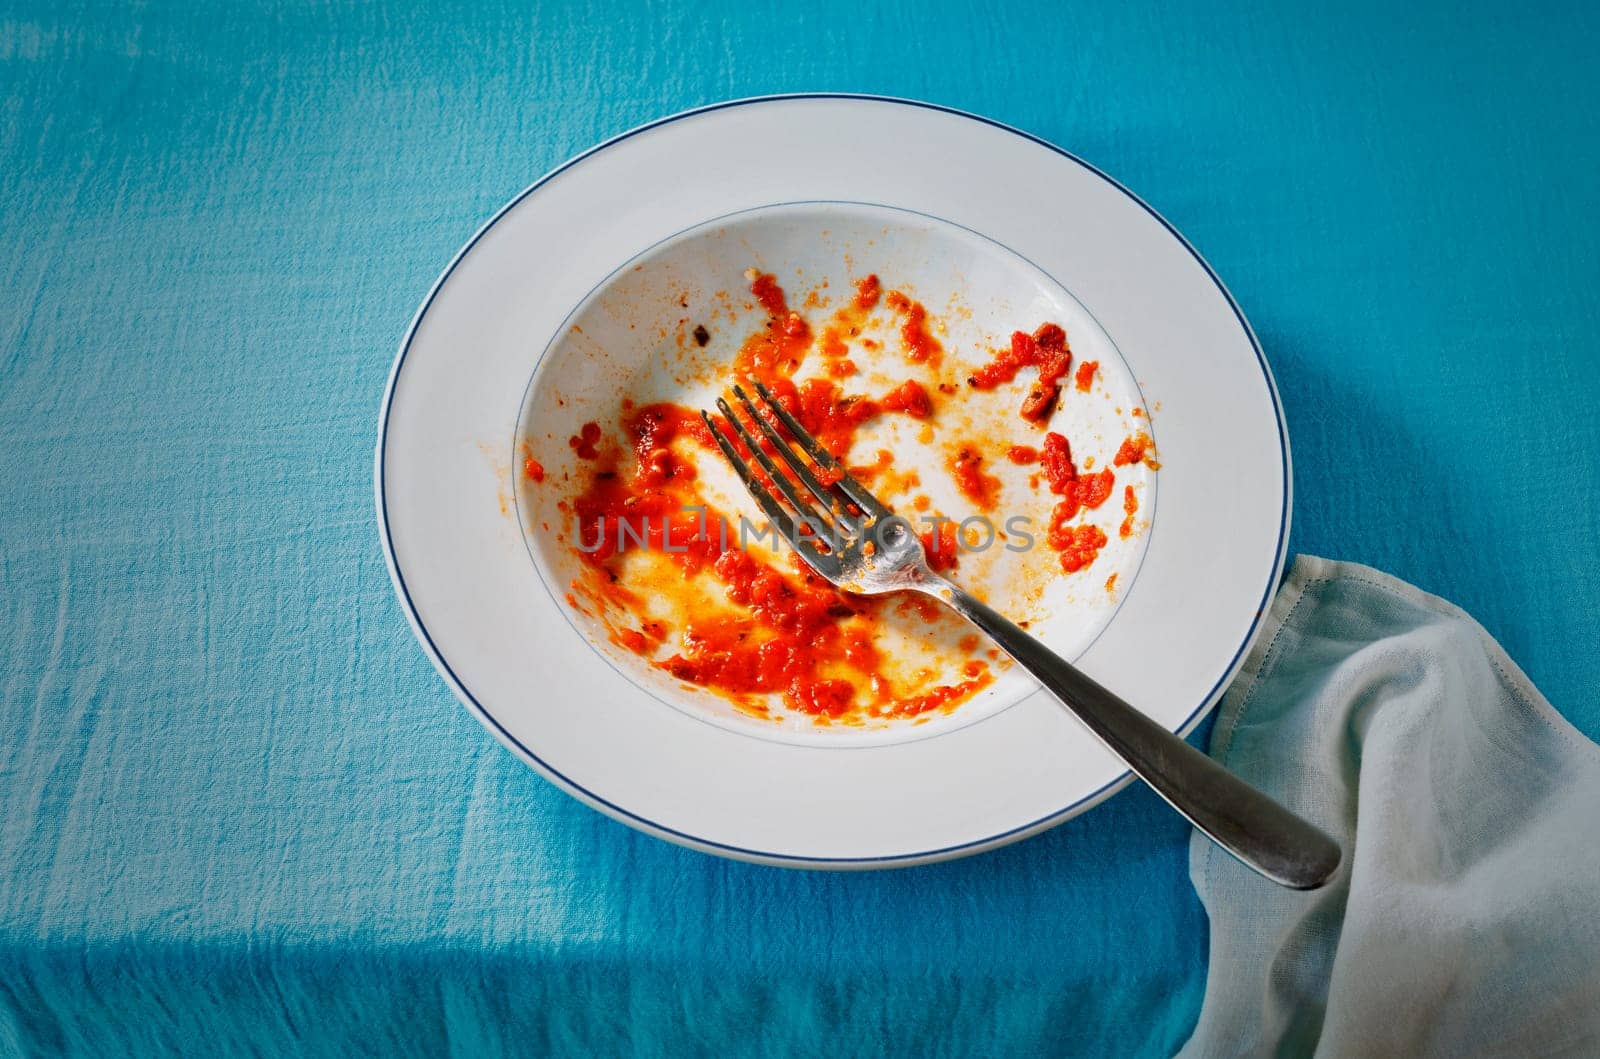 White dirty plate with red tomato sauce leftover and fork on table with blue cloth